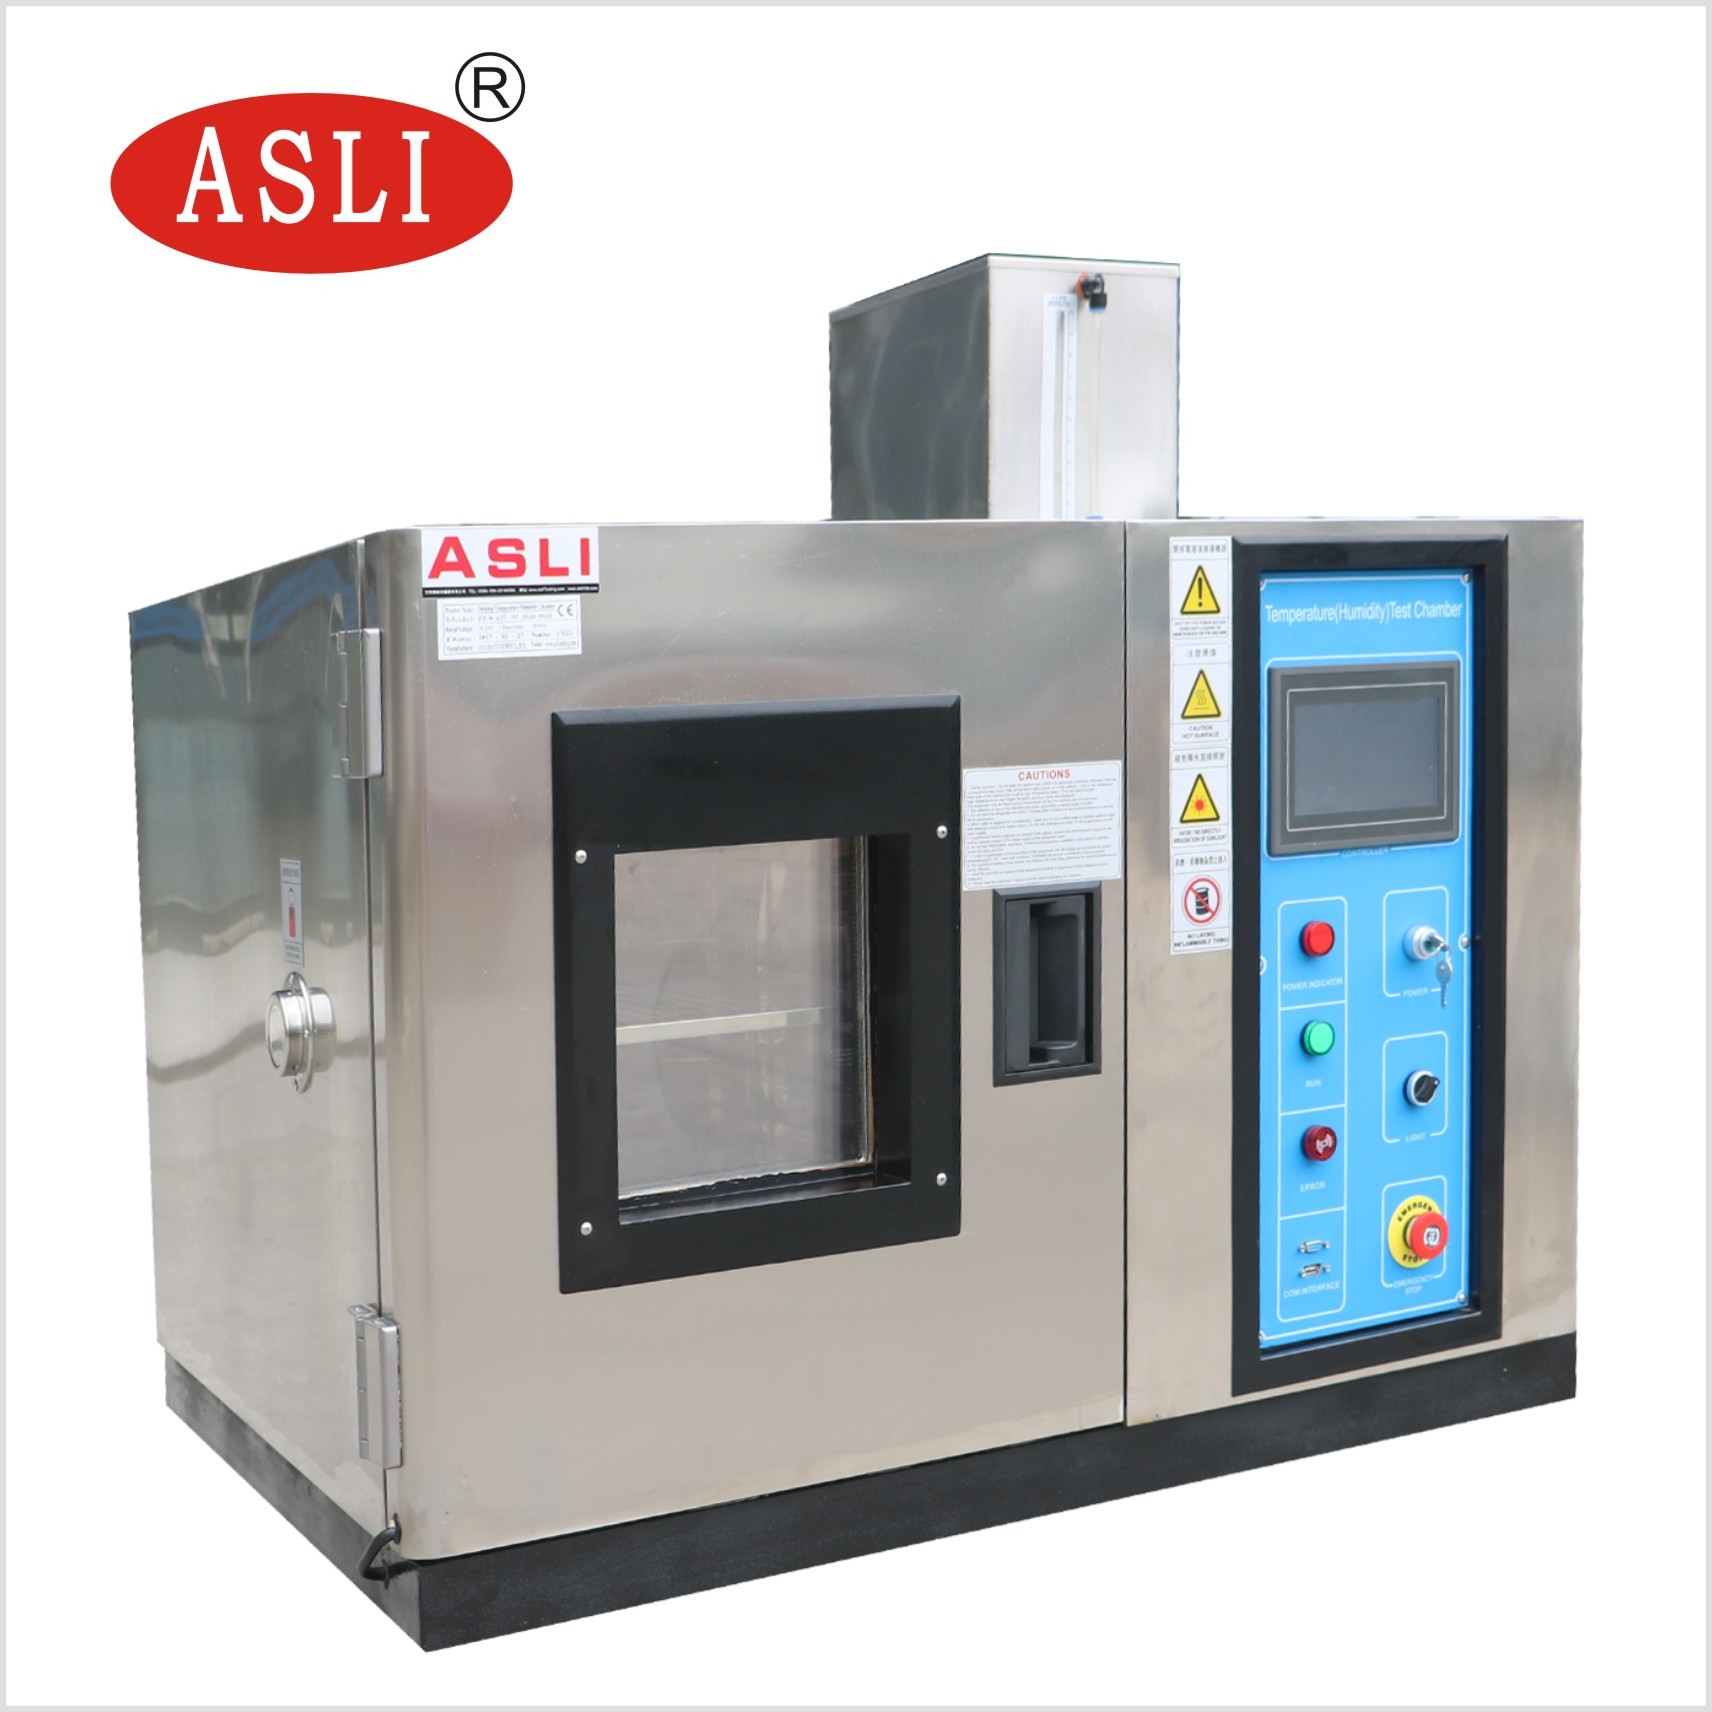 China Constant High Low Temperature Cycling Desktop Thermal Humidity Test Chamber wholesale